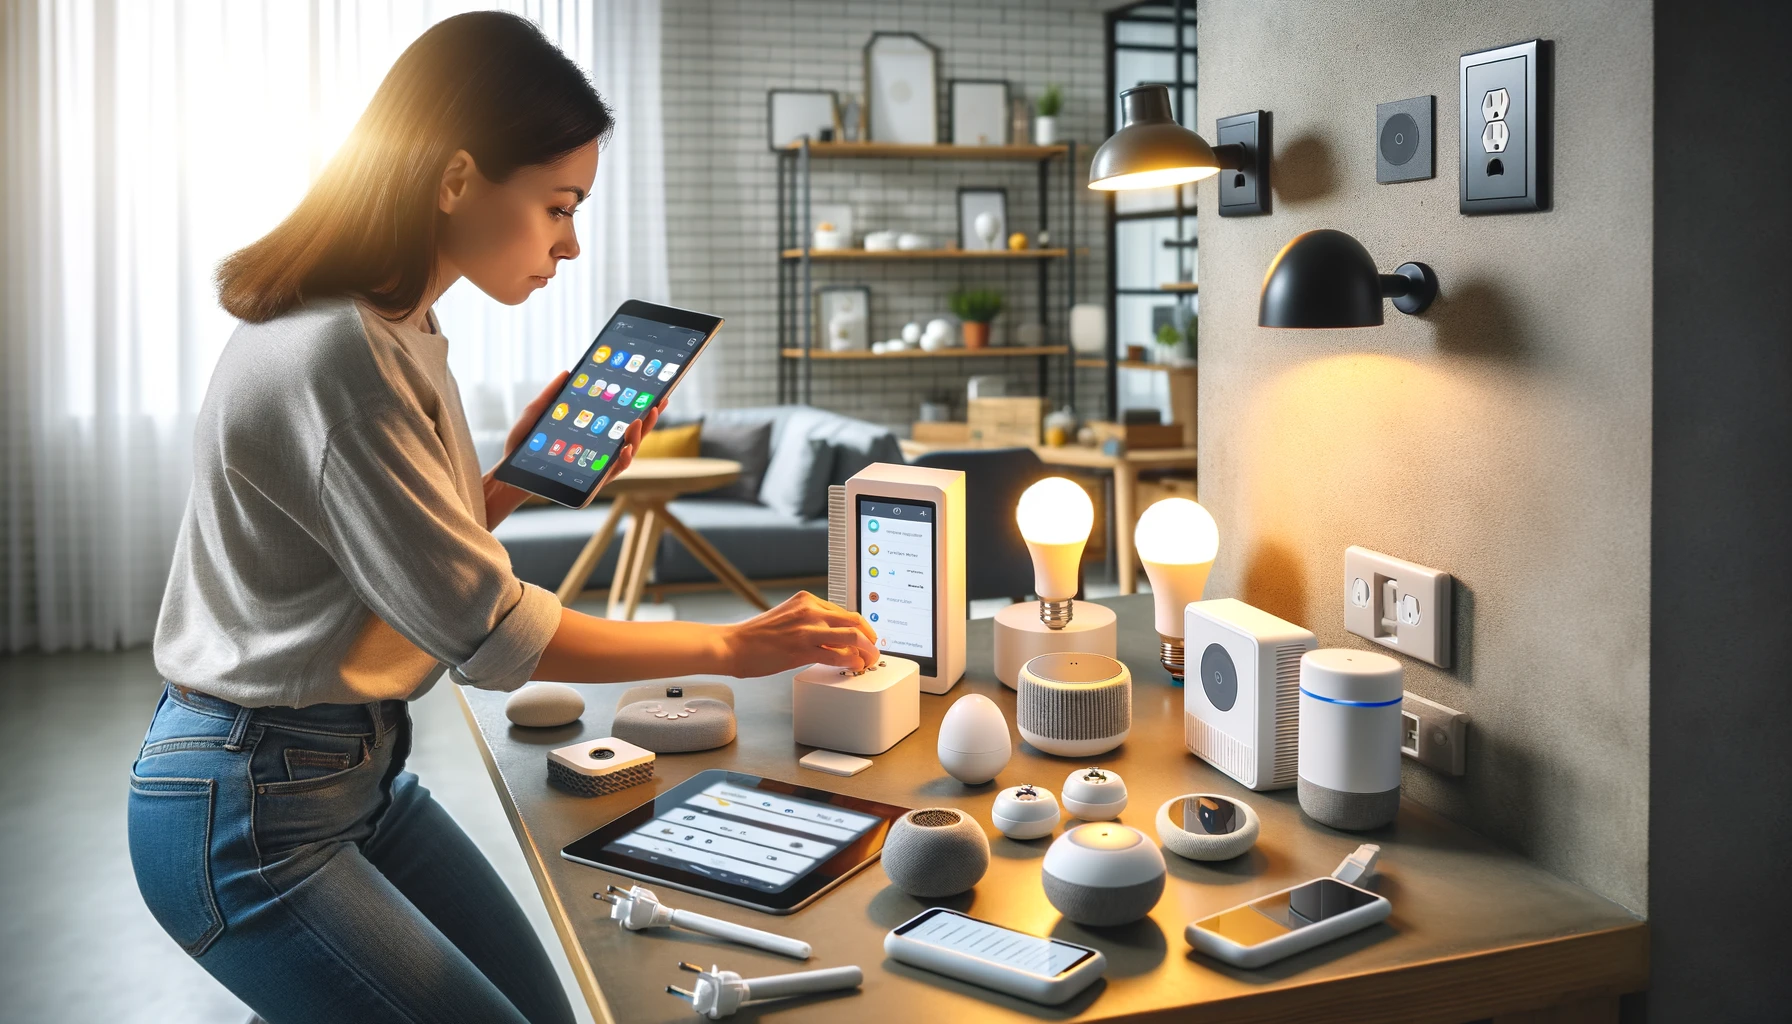 A woman setting up a home automation system, working with devices like smart bulbs, smart plugs, and a tablet or smartphone